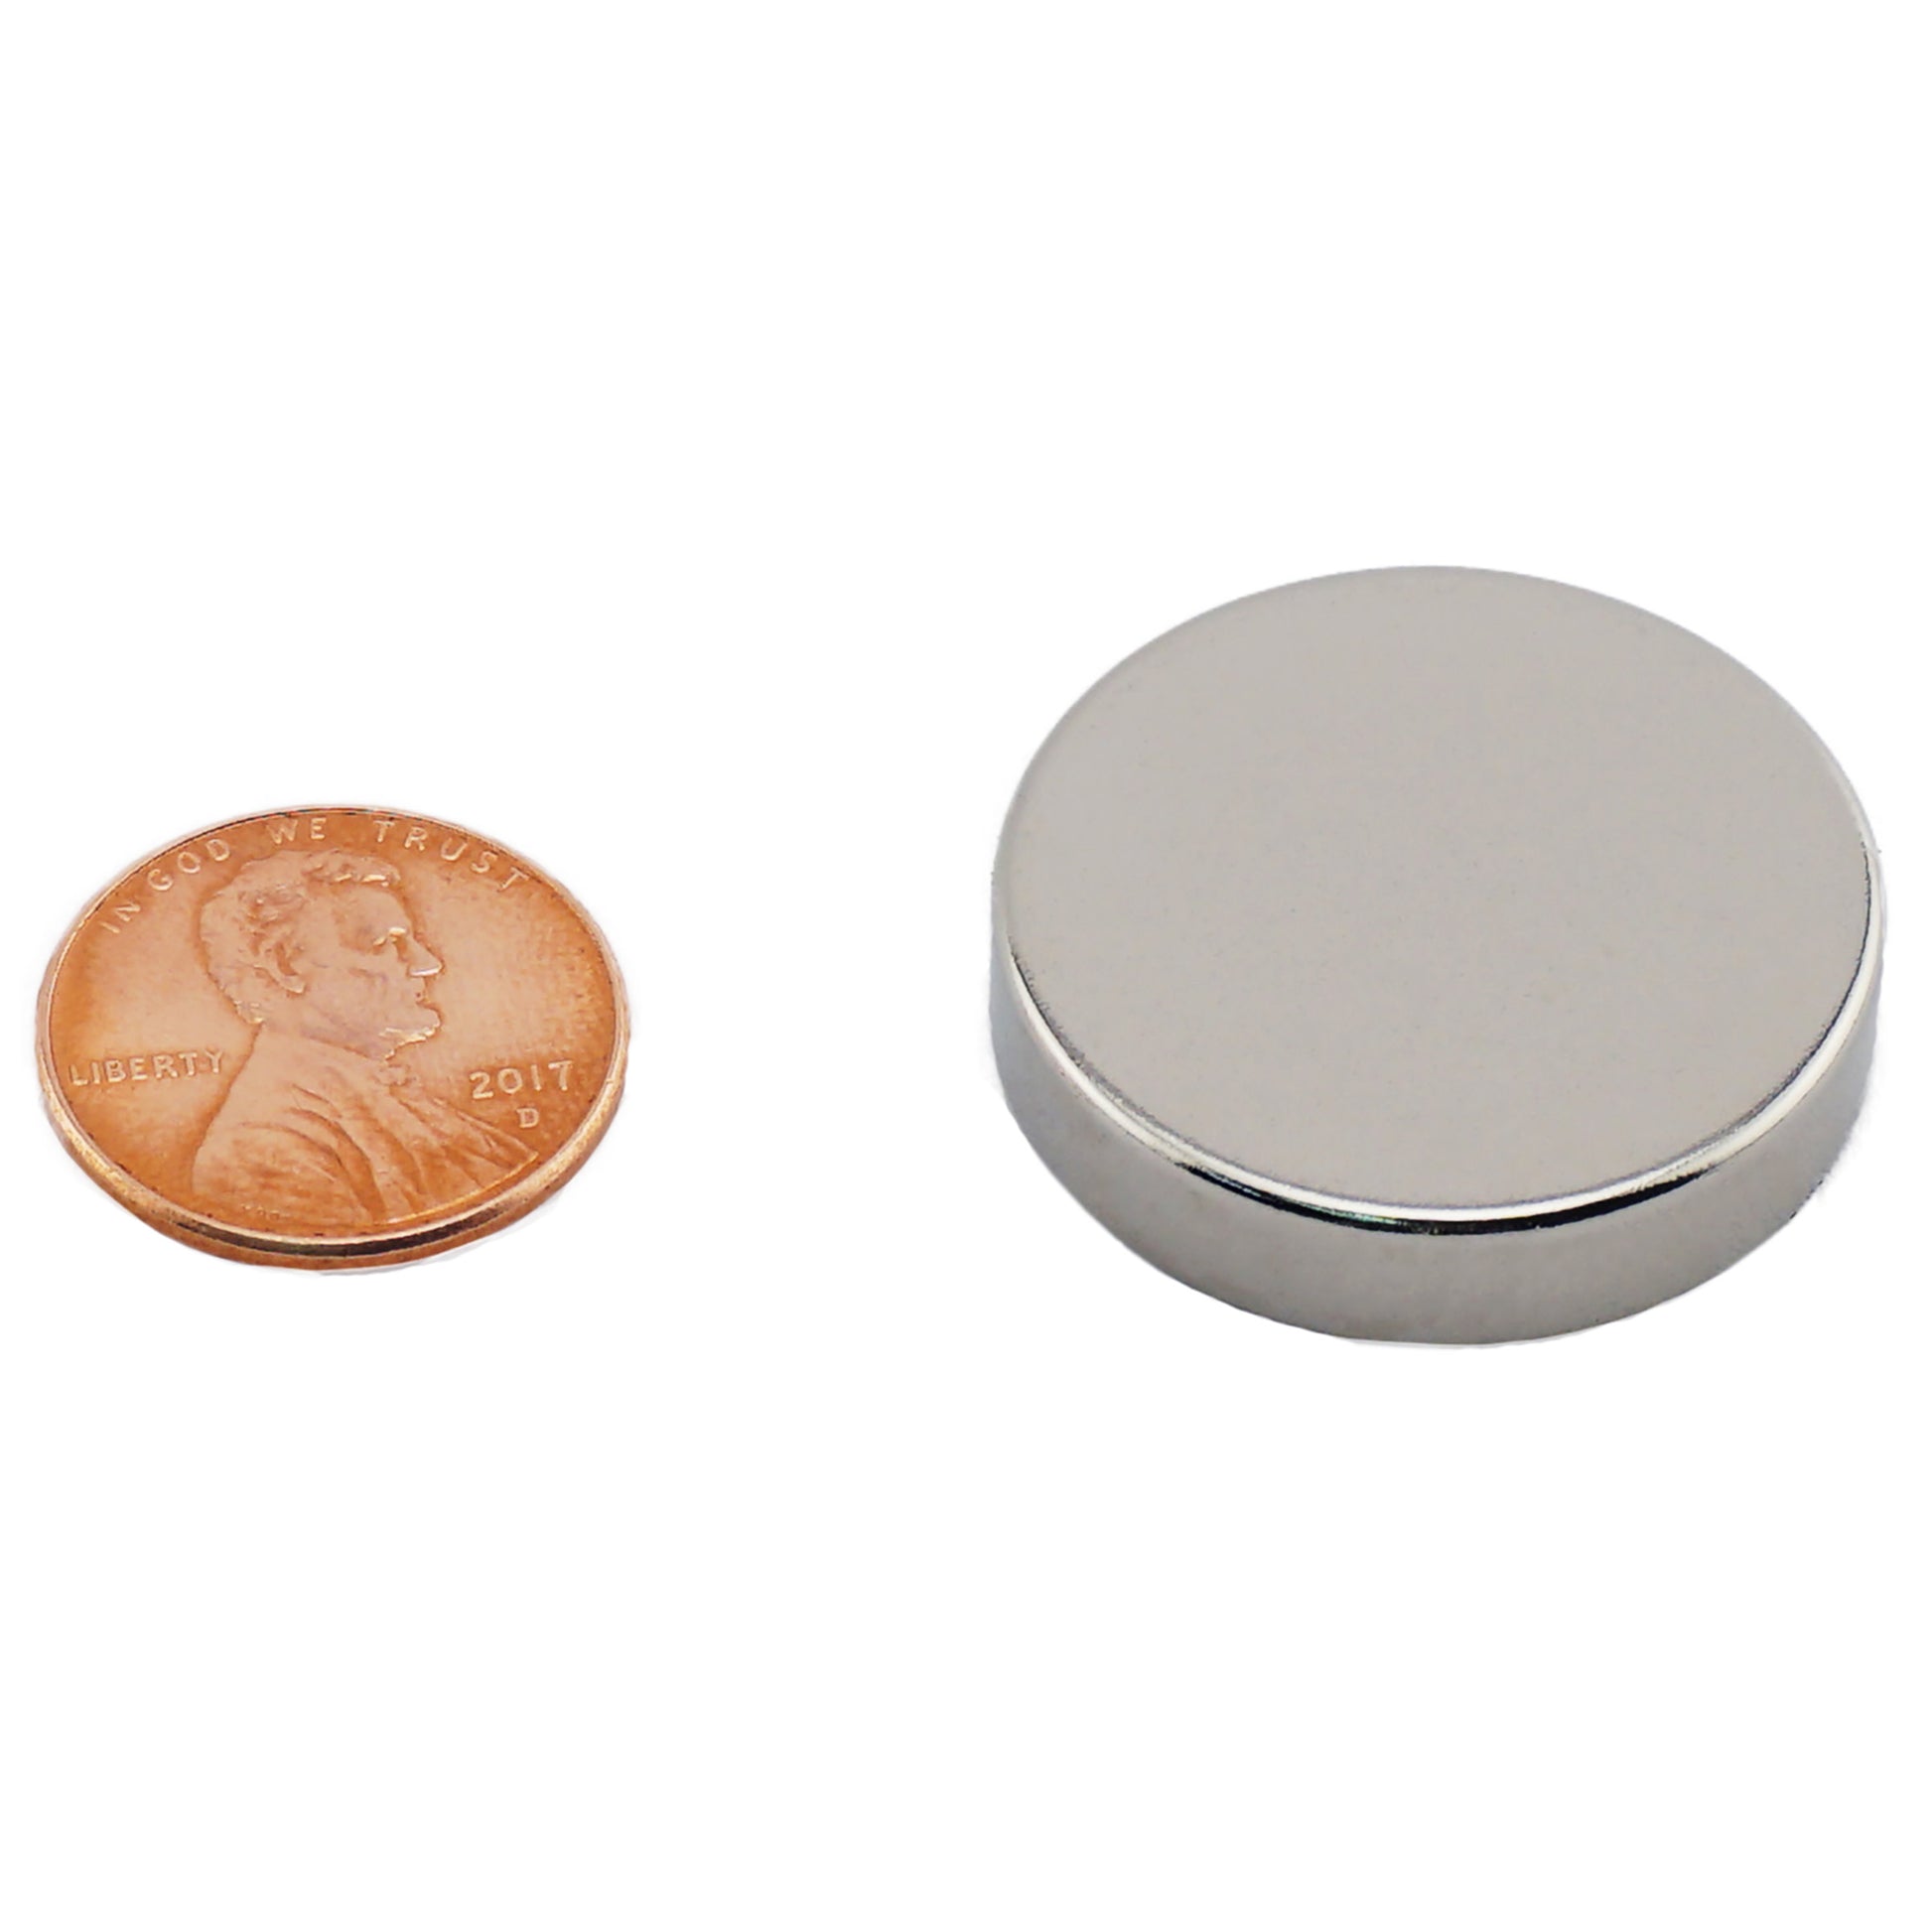 Load image into Gallery viewer, ND011202N Neodymium Disc Magnet - Compared to Penny for Size Reference